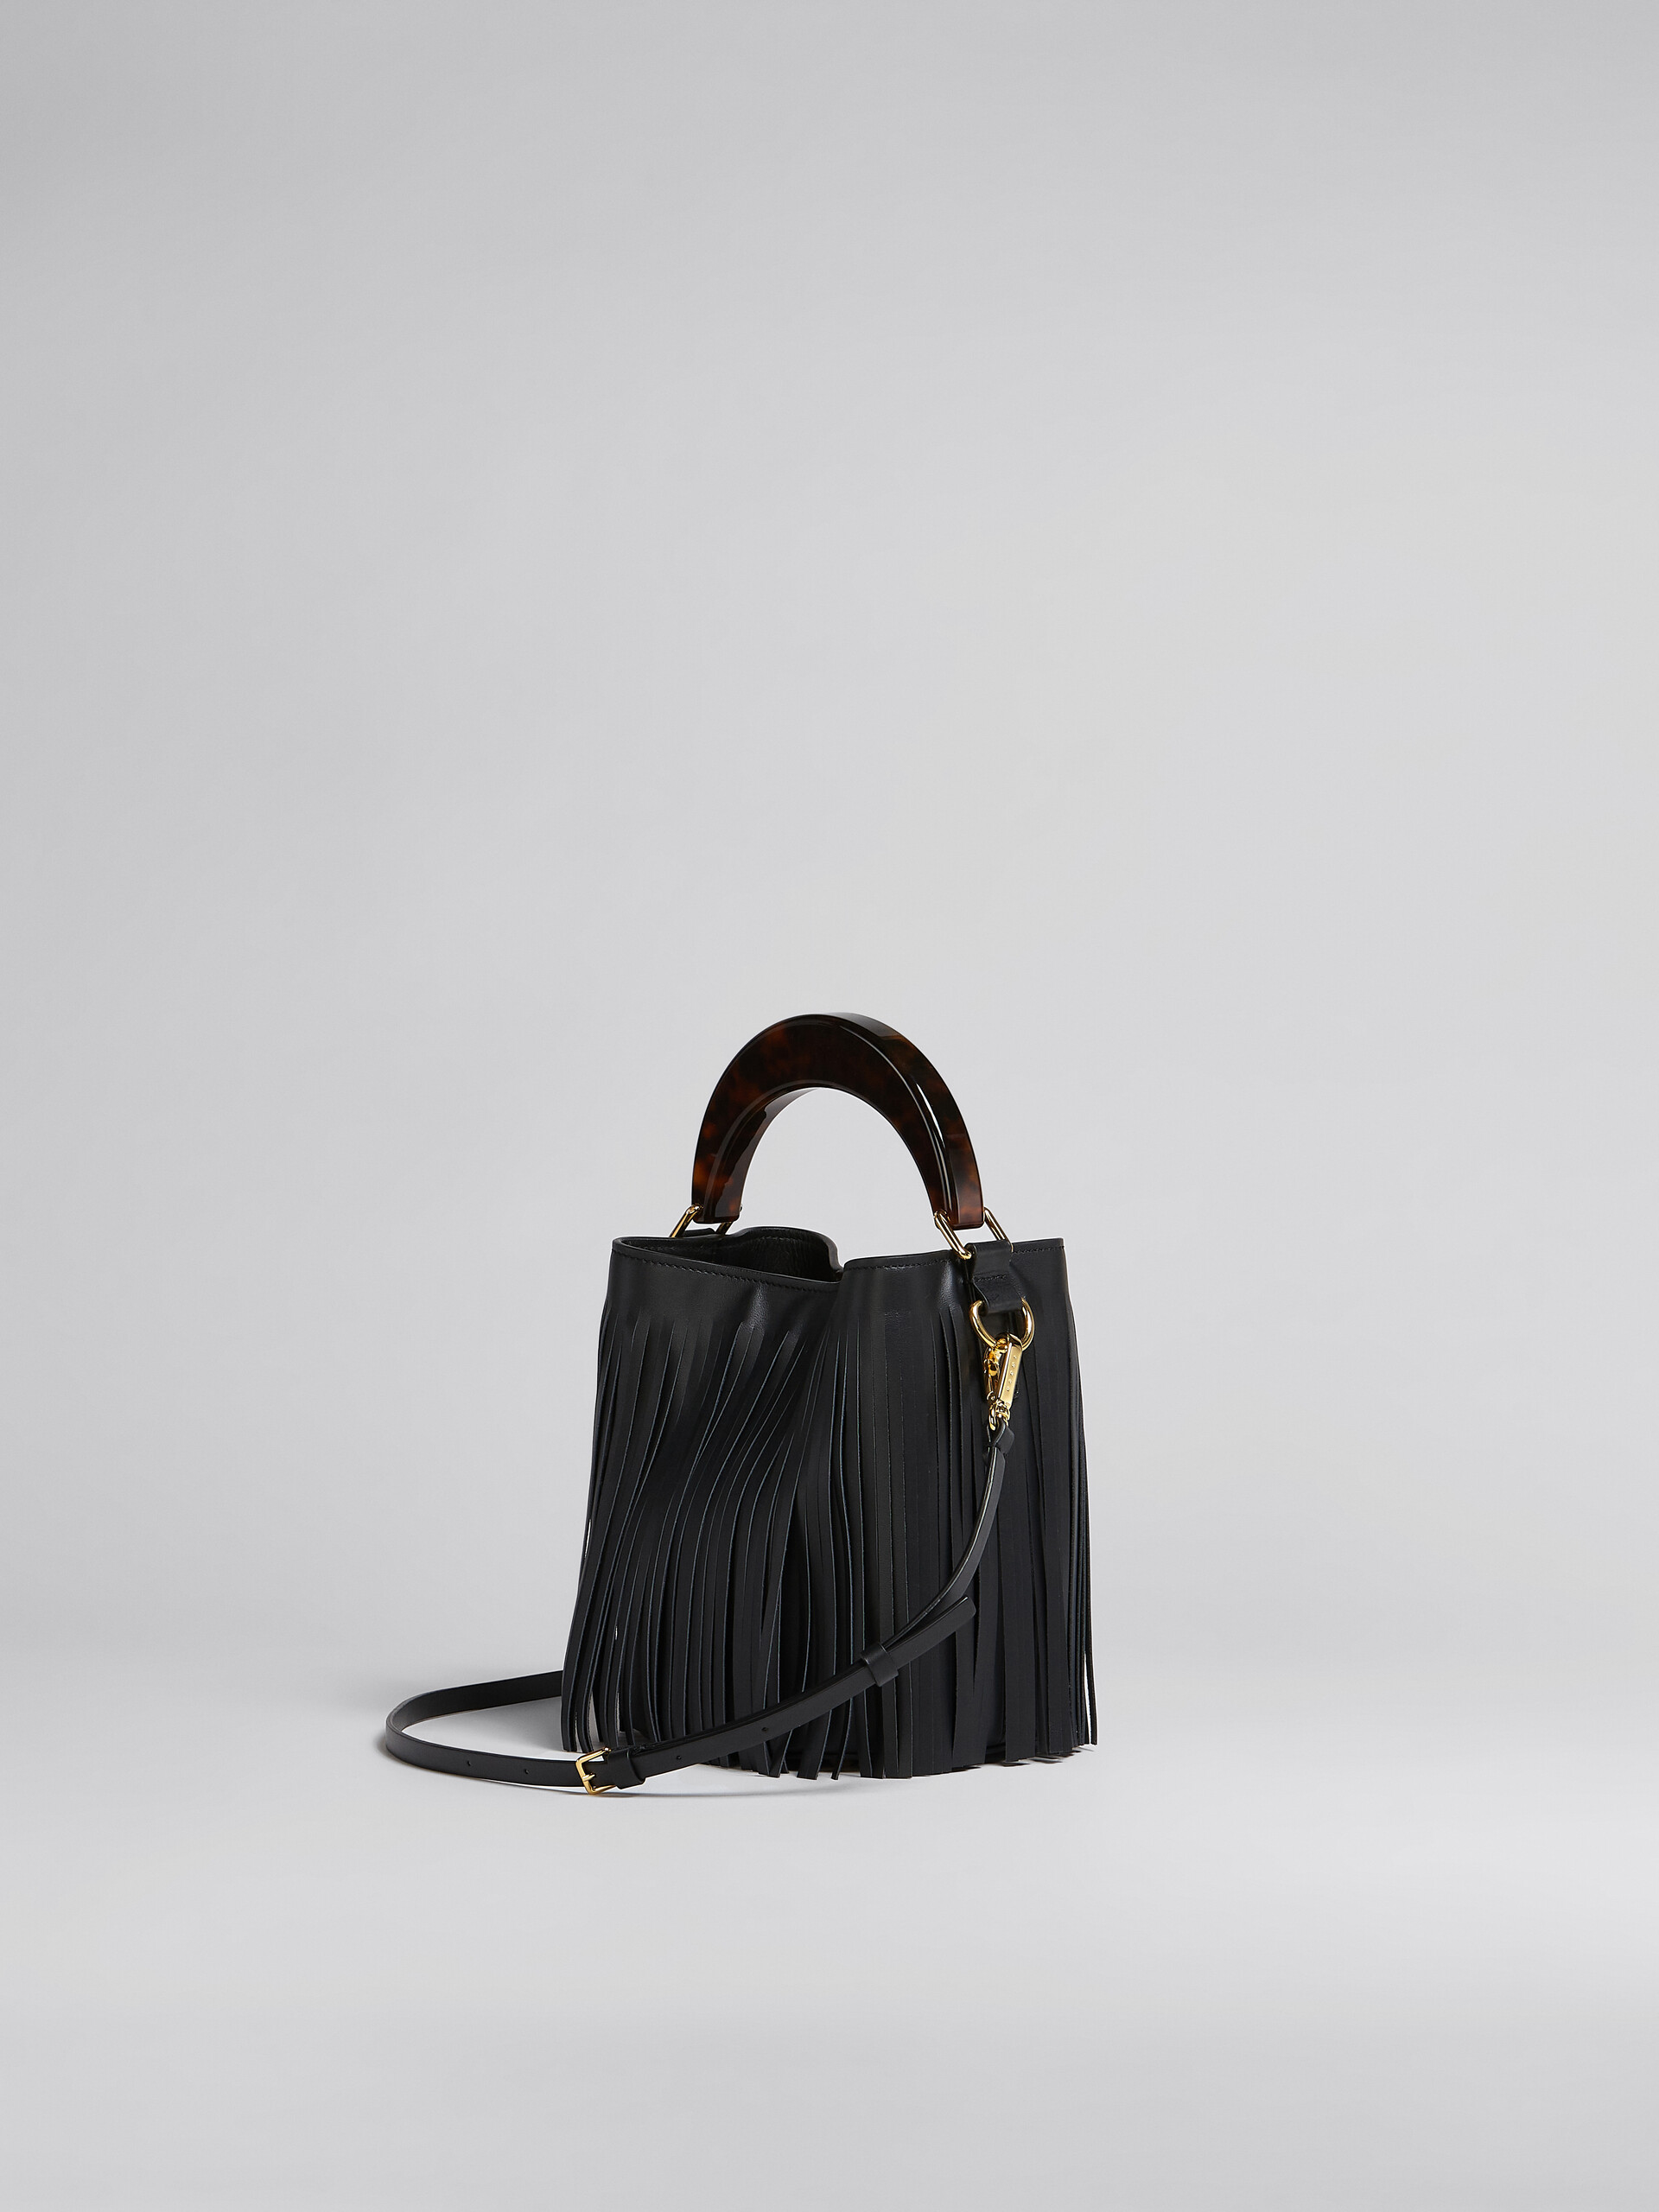 Venice Small Bucket in black leather with fringes - Shoulder Bags - Image 3